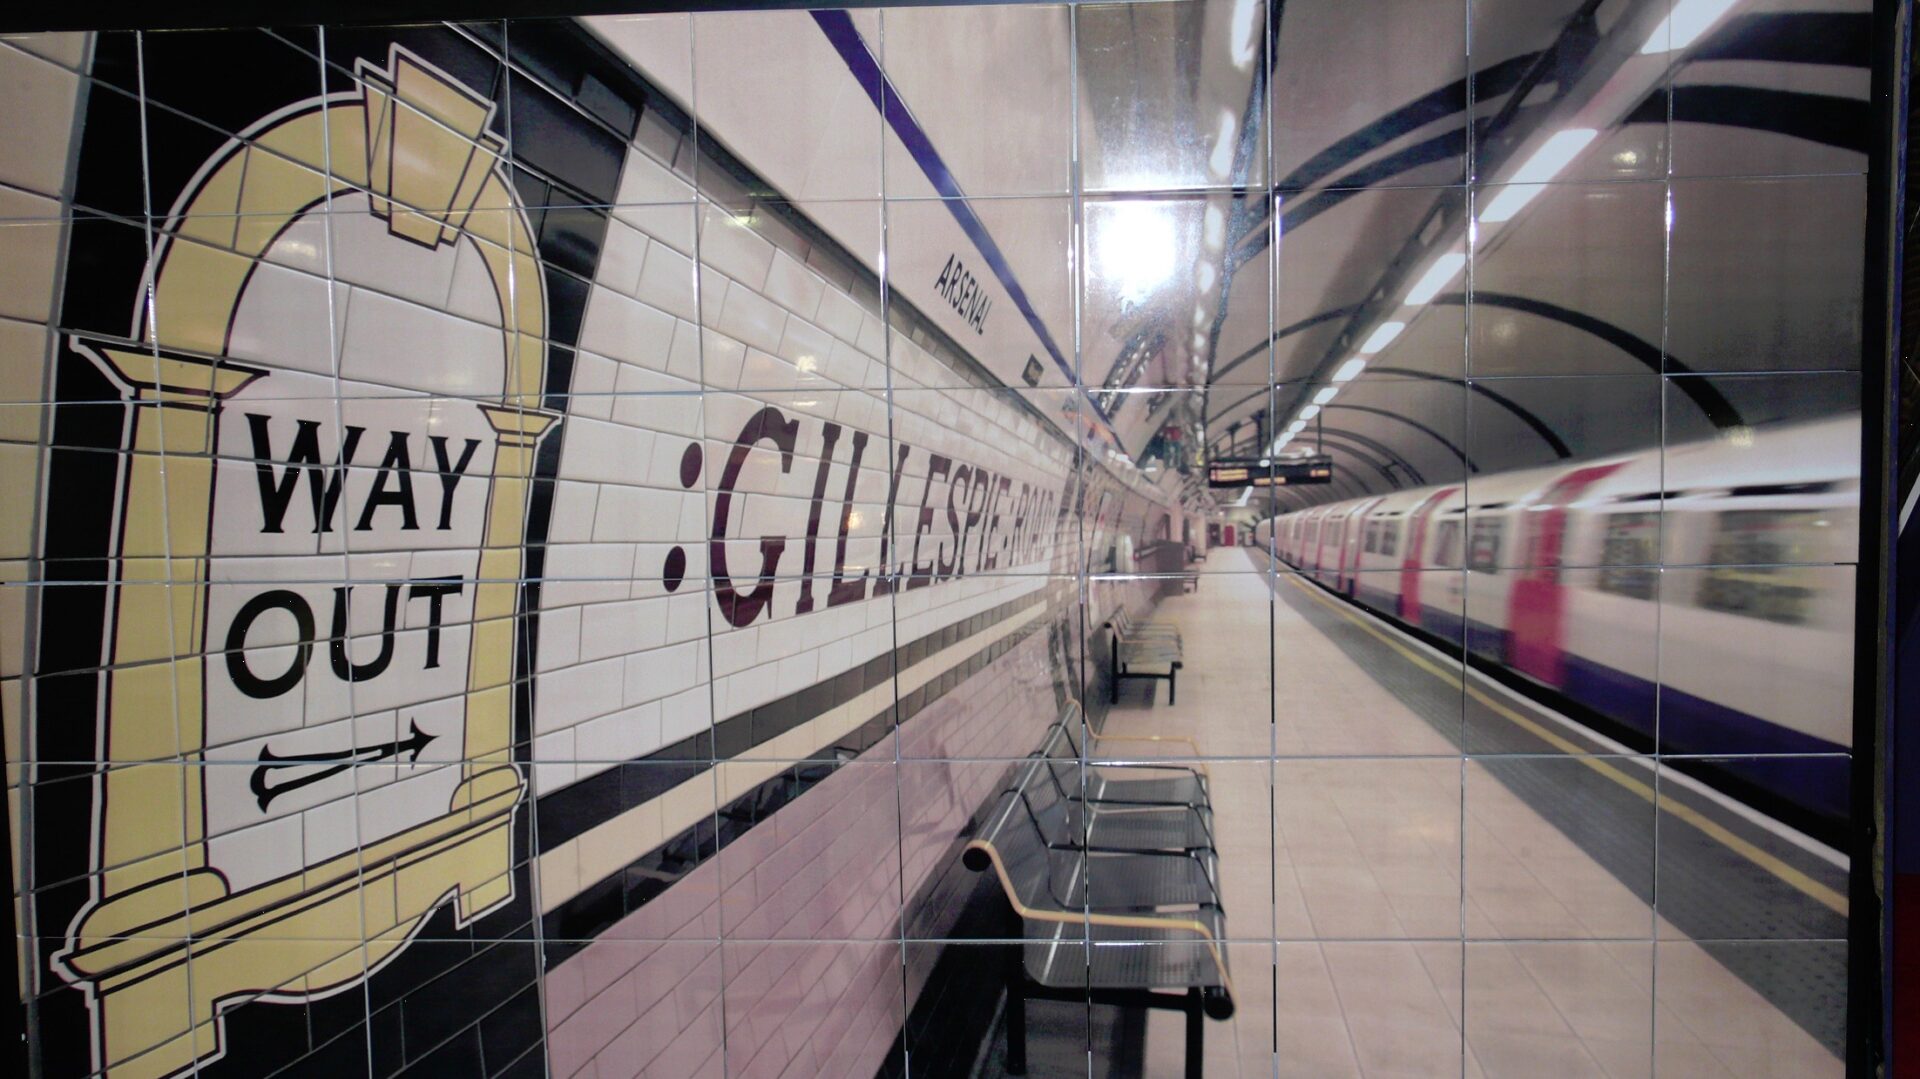 The London Subway Wall Decorated With Tiles